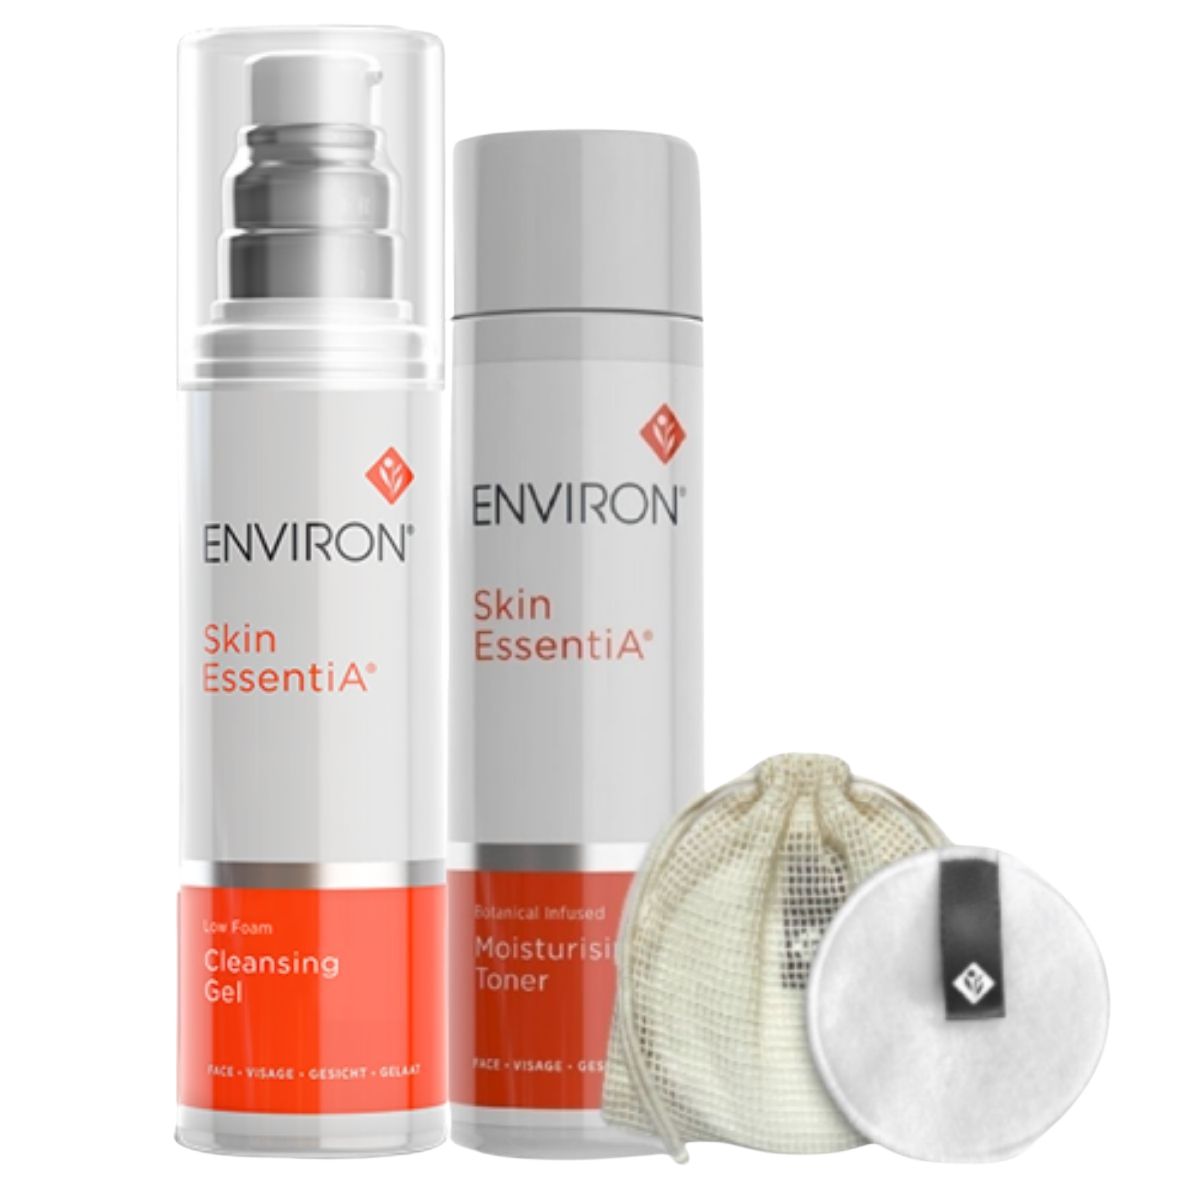 Environ Low Foam Cleansing Gel and Moisturising Toner with Complimentary Reusable Cotton Pad